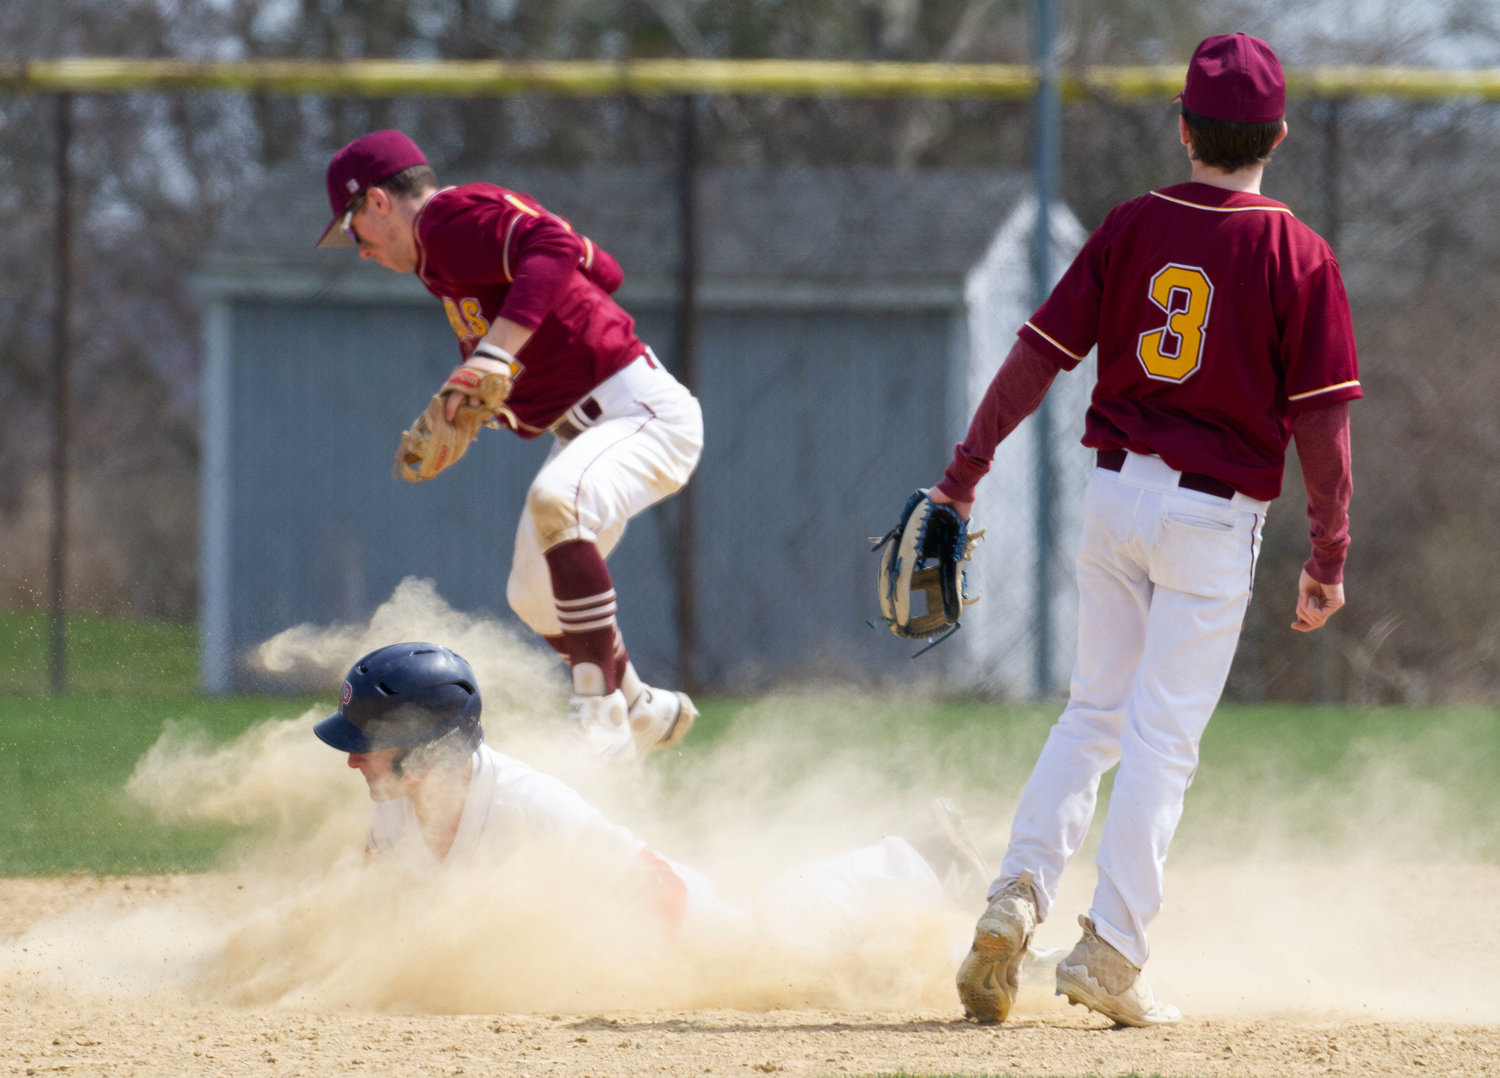 Portsmouth’s Caleb Banks dives into second base for a steal as Tiverton defenders field an errant throw by the catcher.